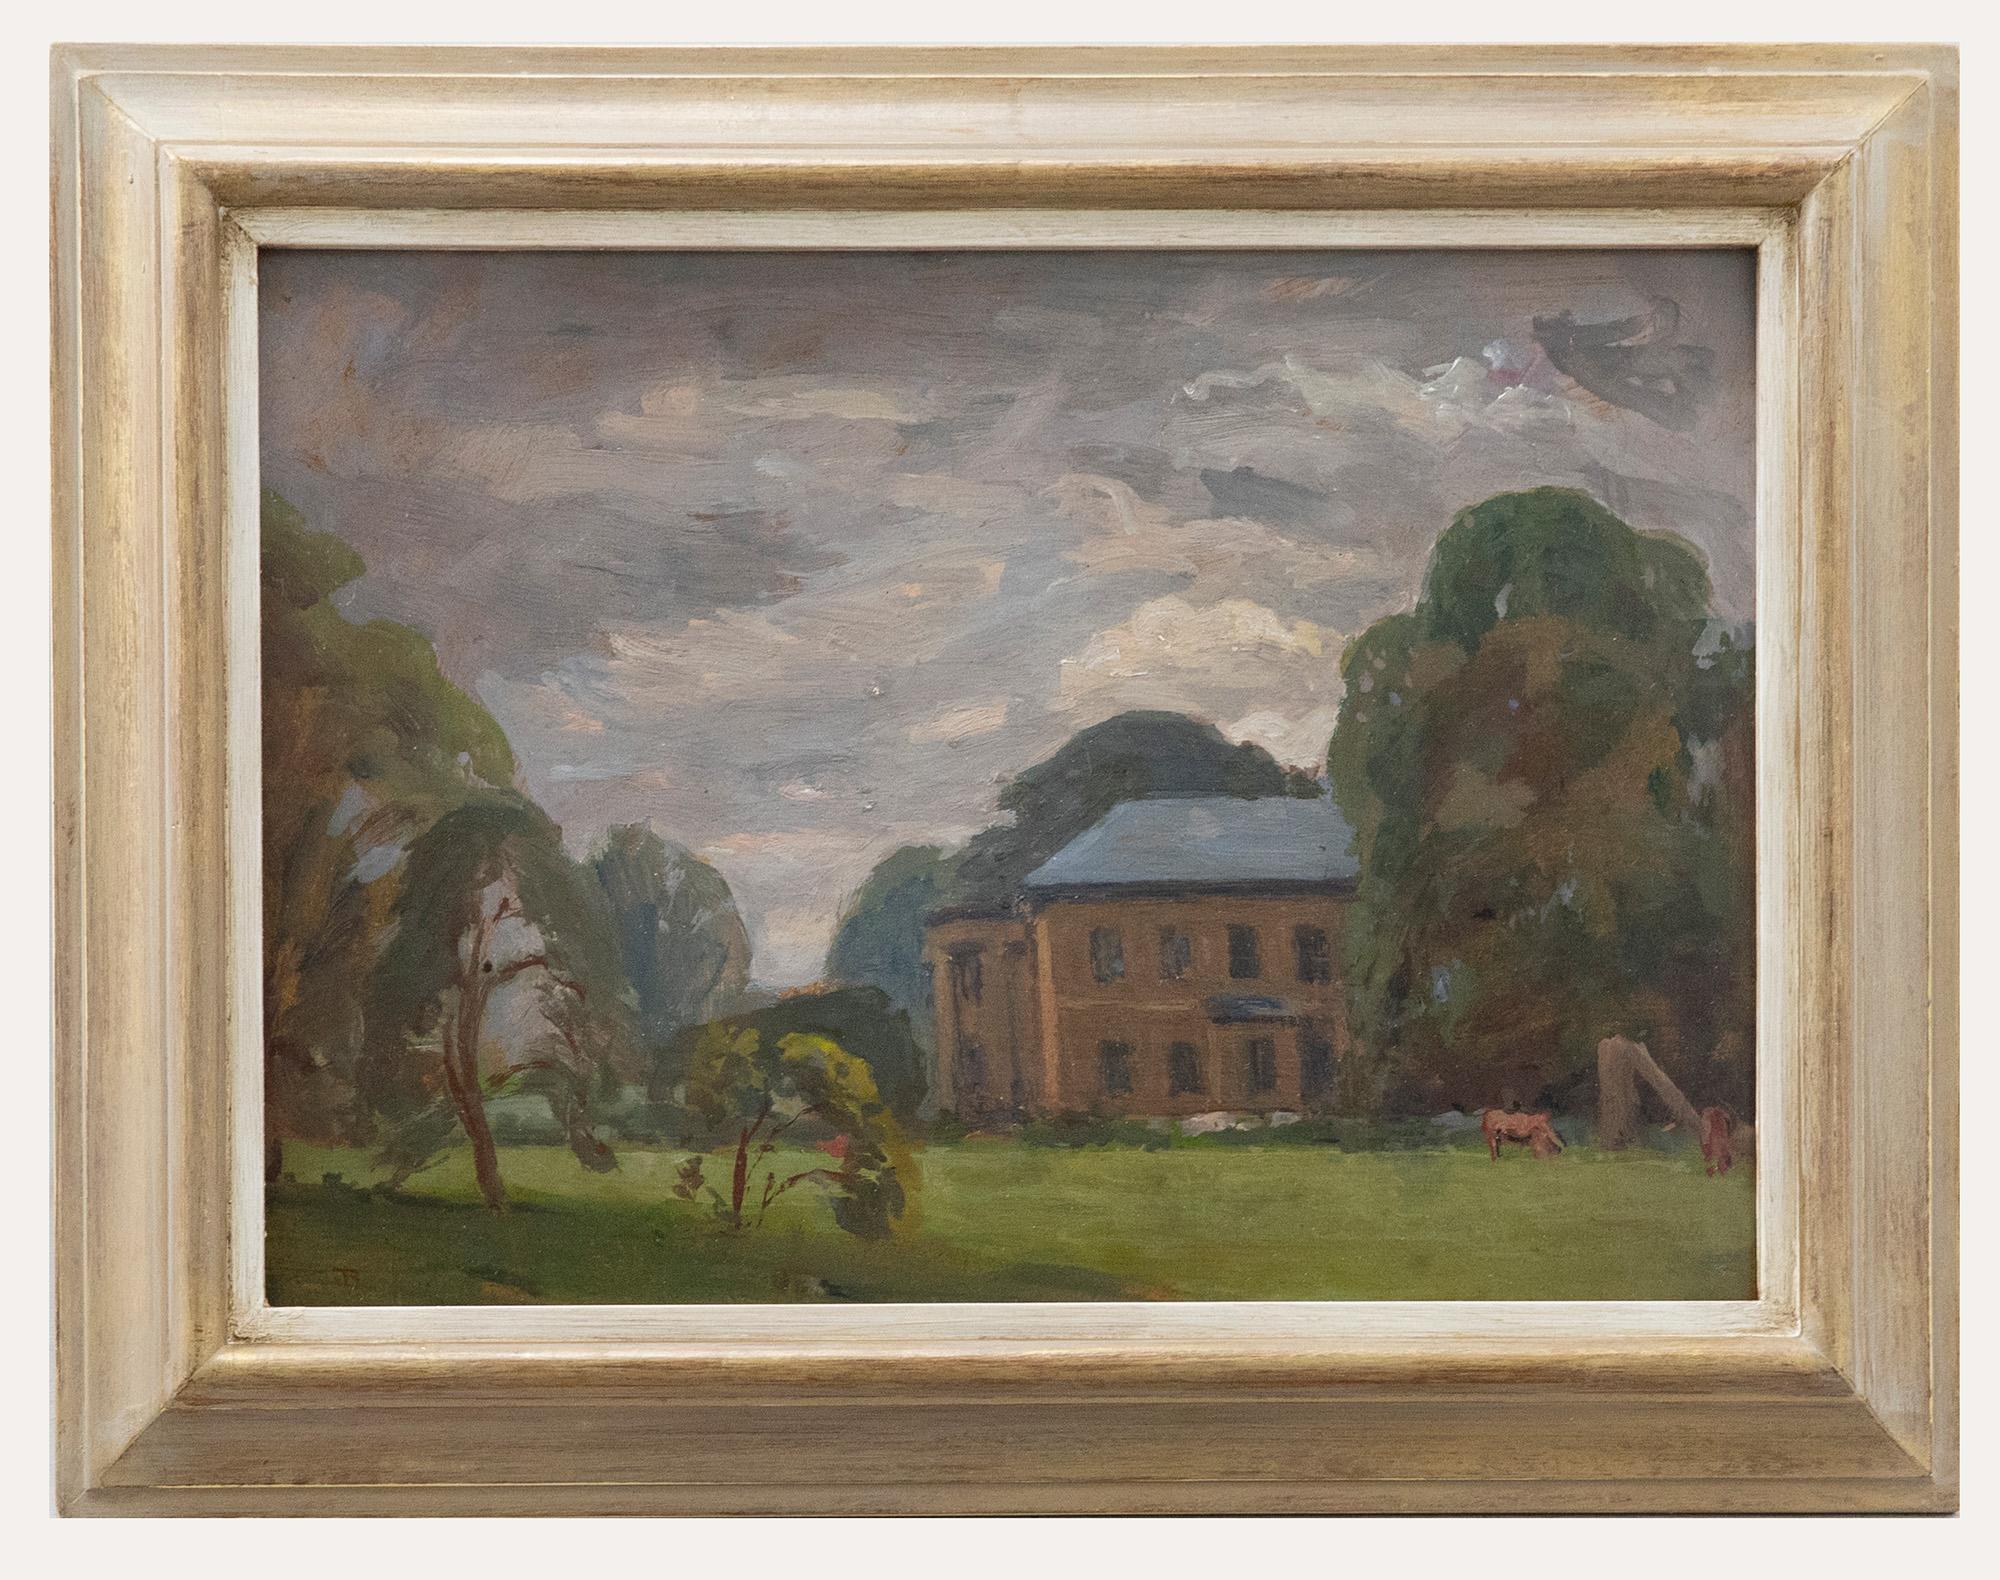 John Browne Landscape Painting - John Brown (1887-1966) - Early 20th Century Oil, View of the Manor